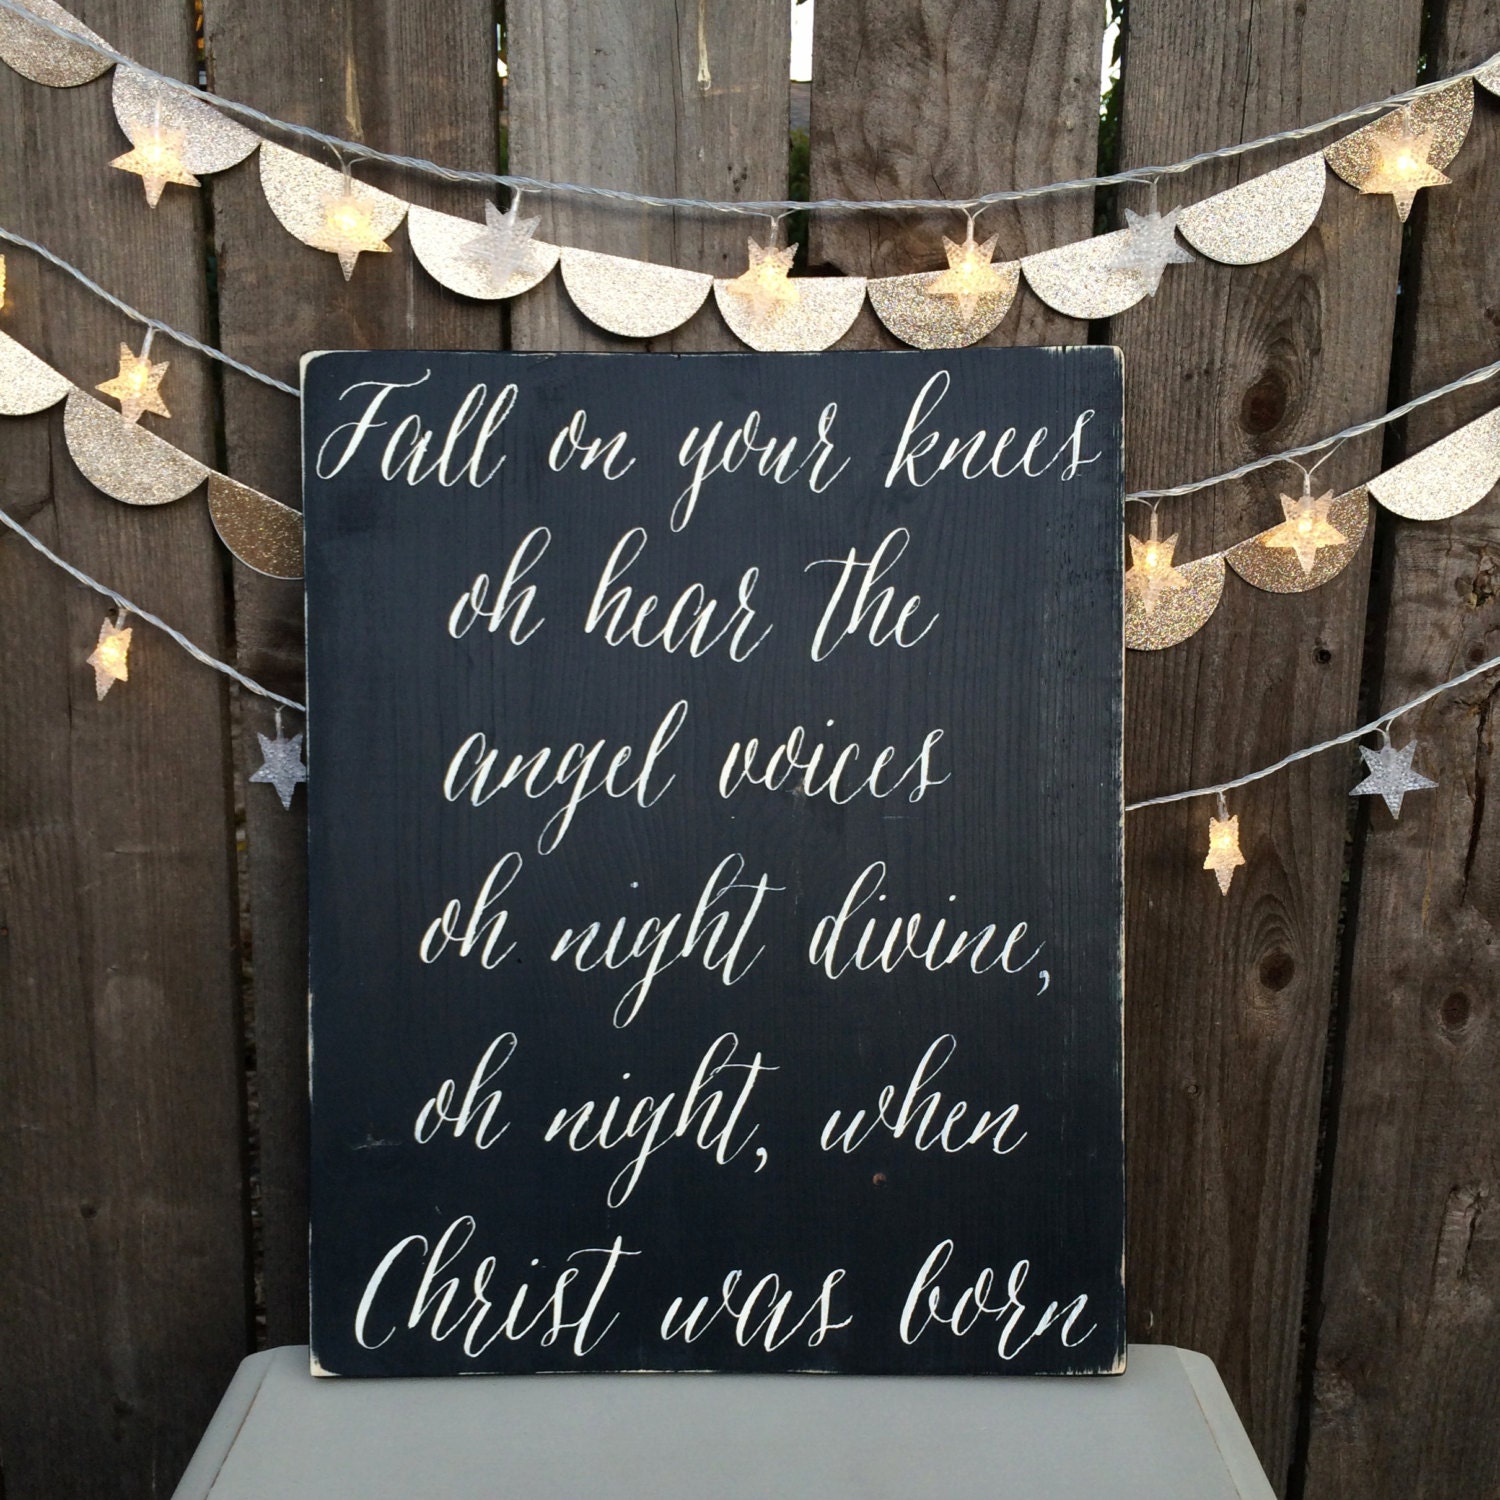 Fall On Your Knees Chalkboard Inspired by AnchoredSoulDesignCo